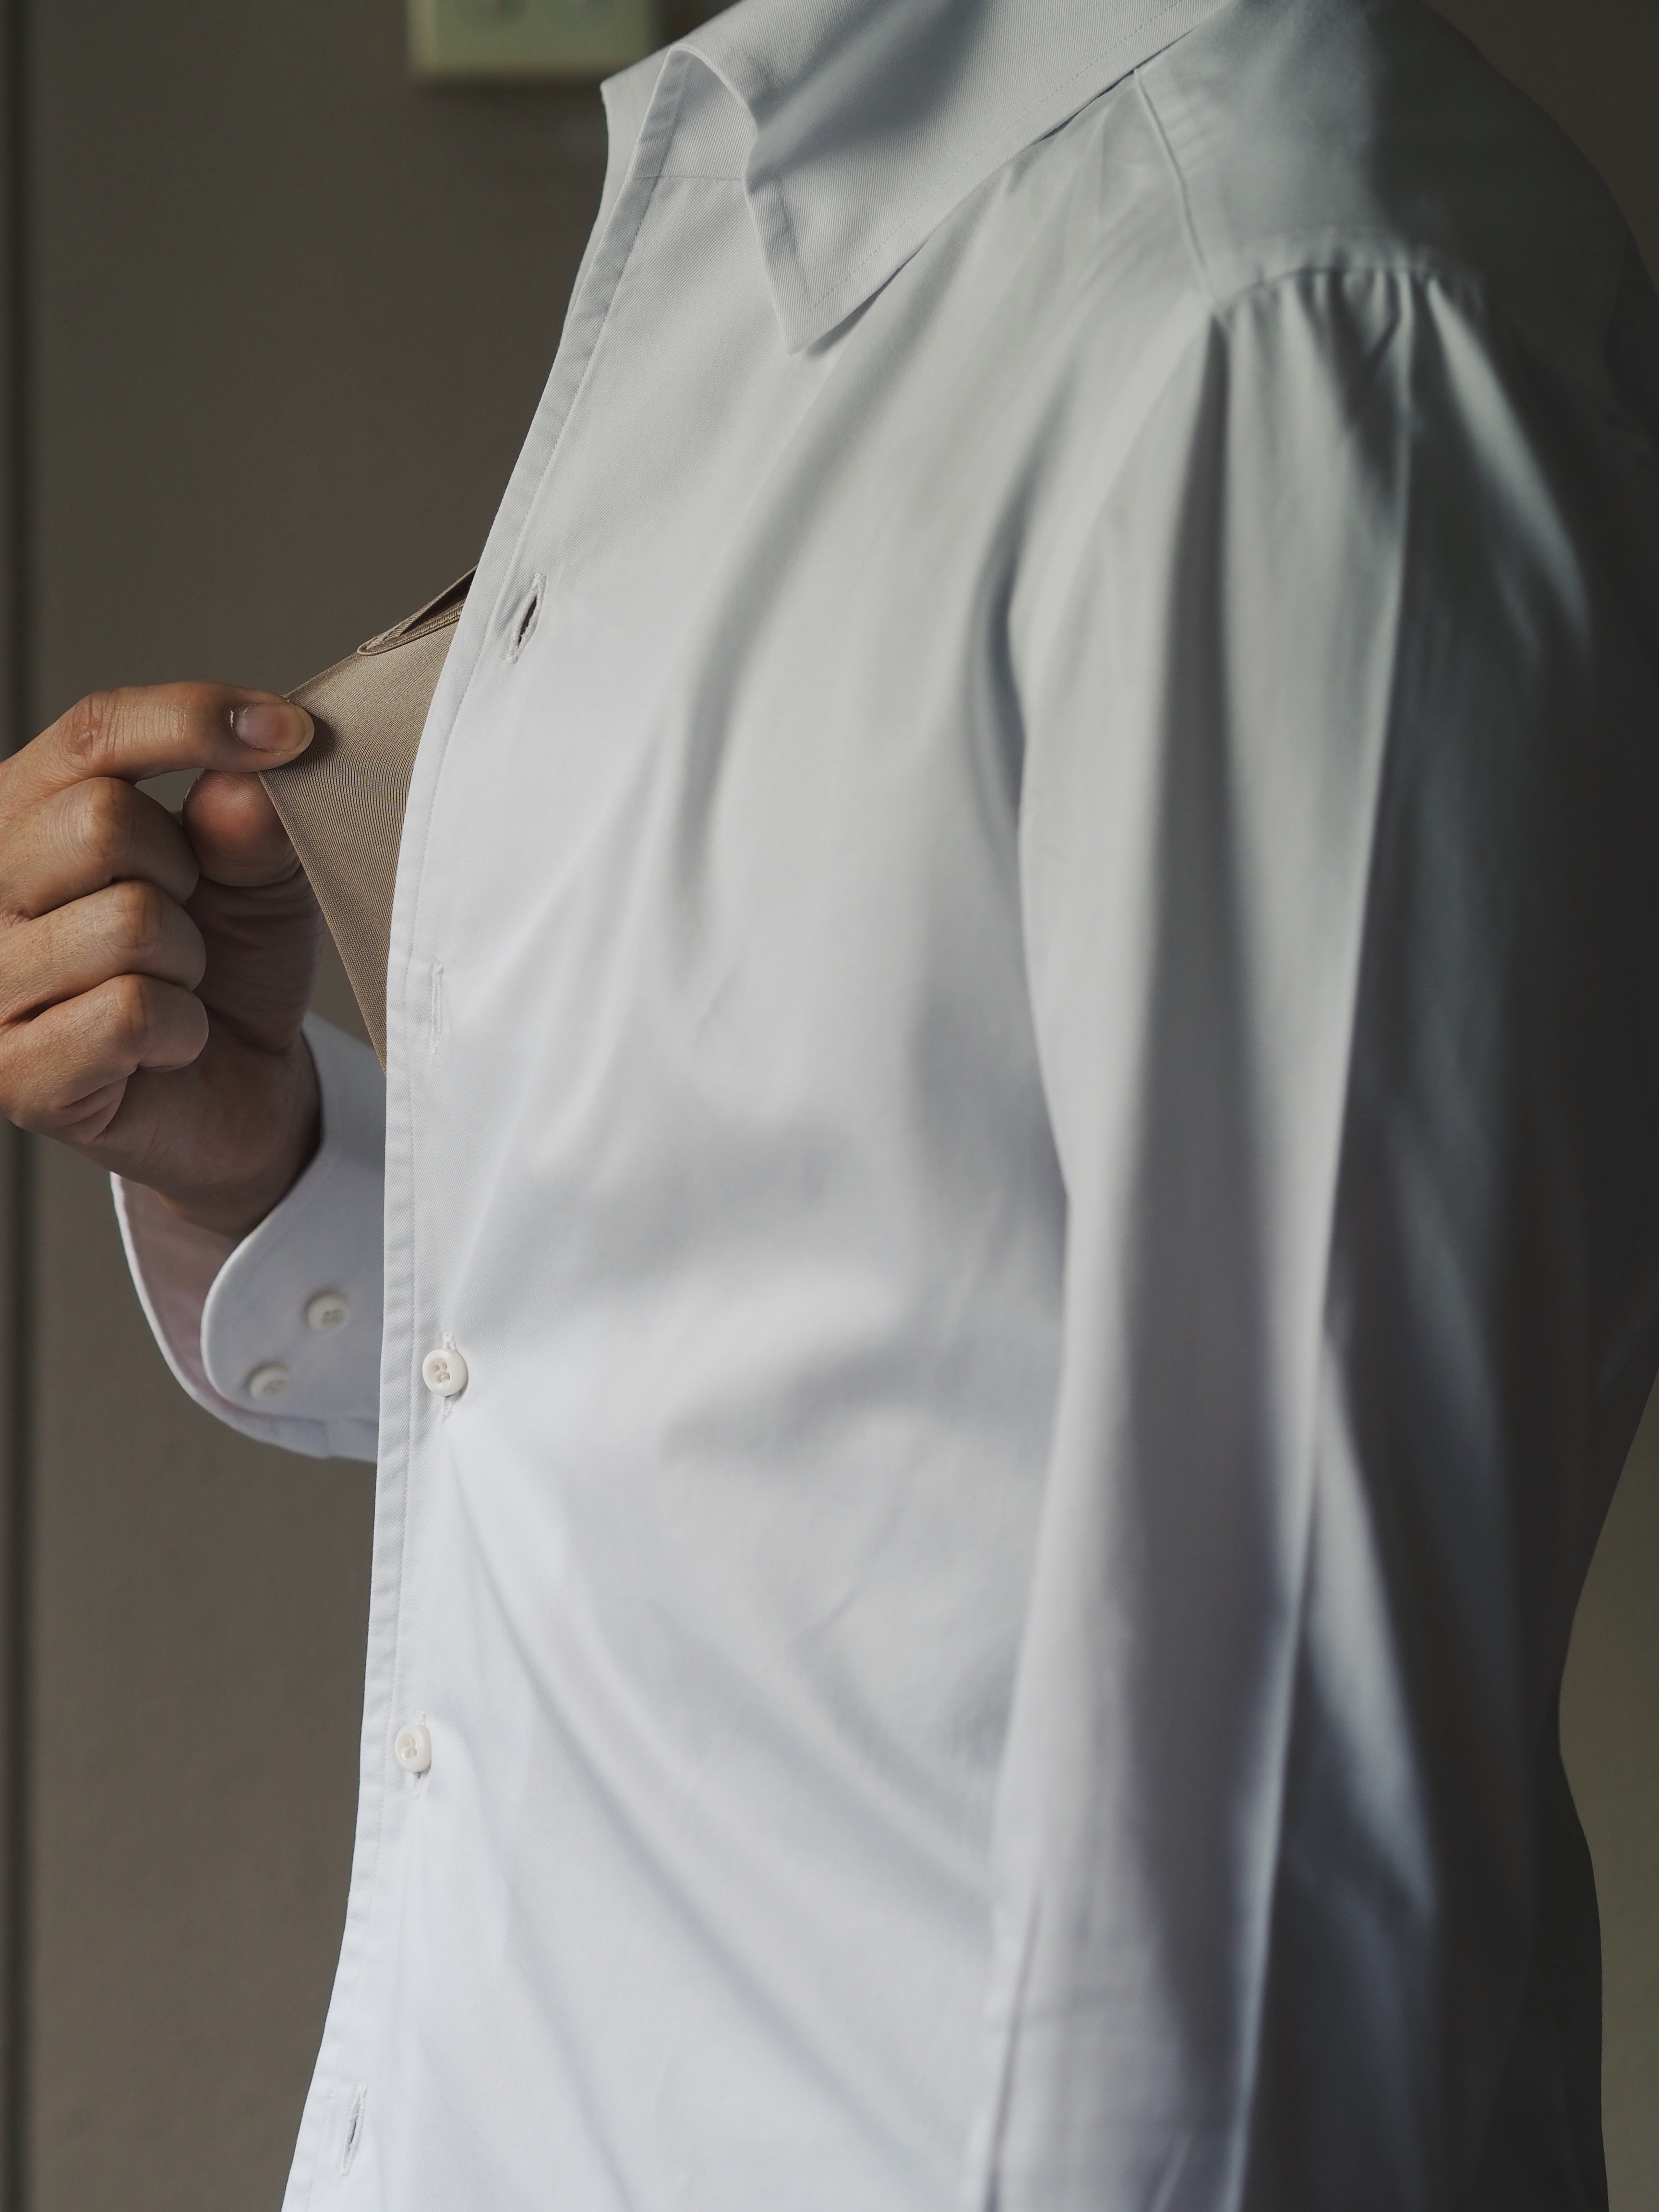 Undershirts: To Wear or Not To Wear? - Assemble Singapore